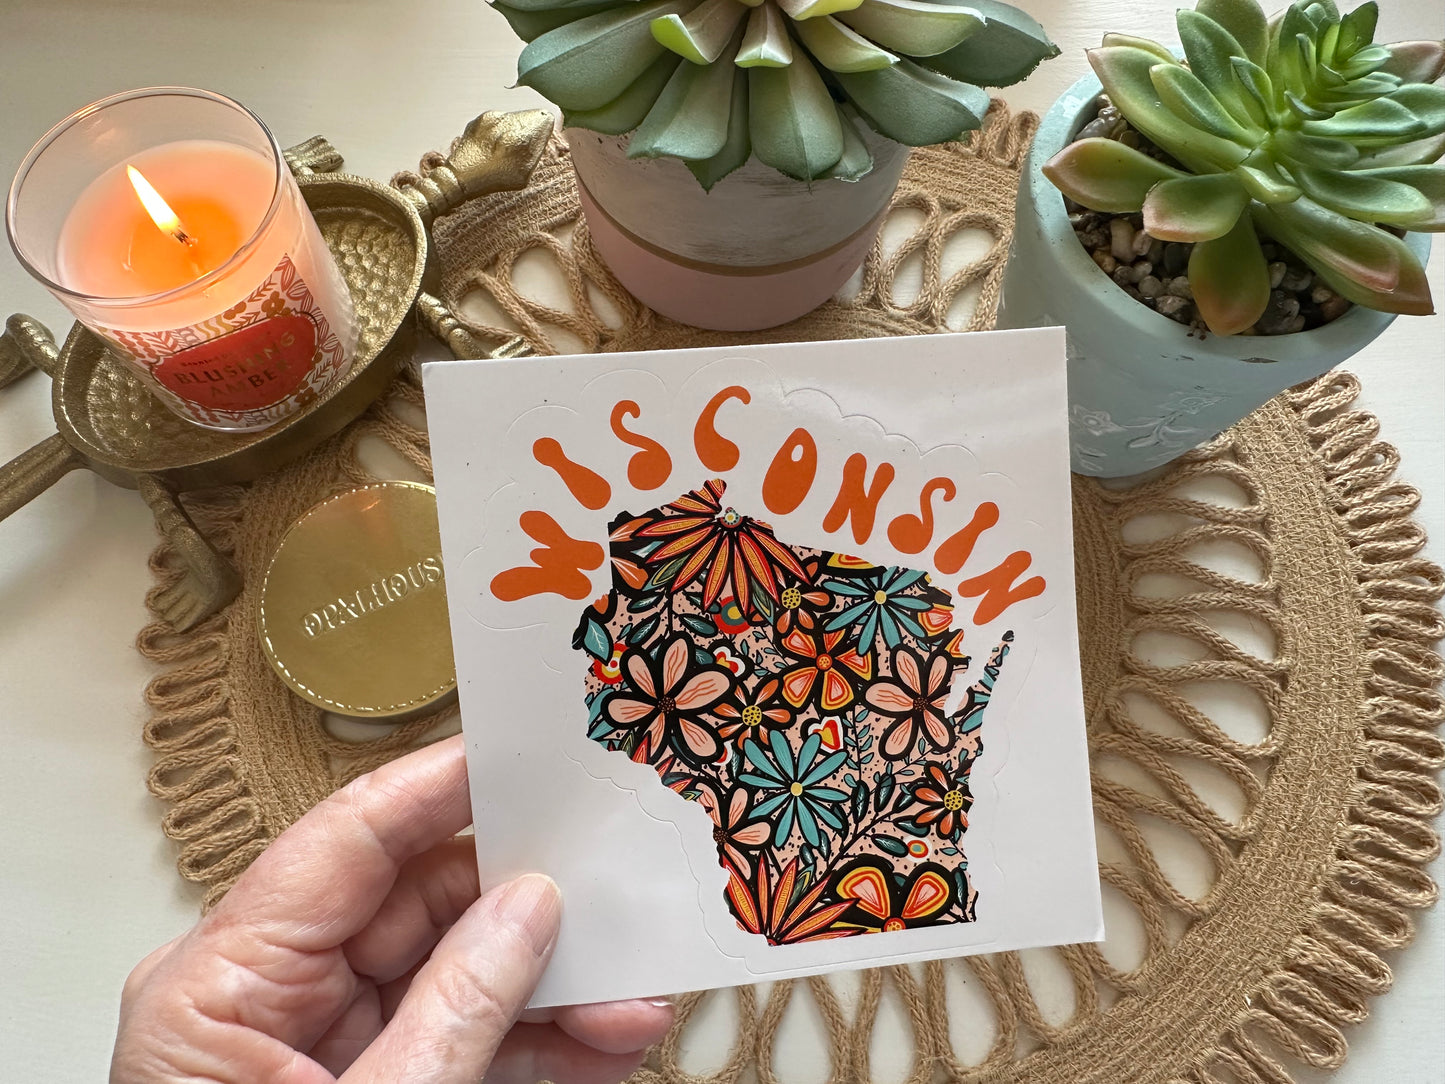 Wisconsin State Sticker | Vinyl Artist Designed Illustration Featuring Wisconsin State Filled With Retro Flowers with Retro Hand-Lettering Die-Cut Stickers